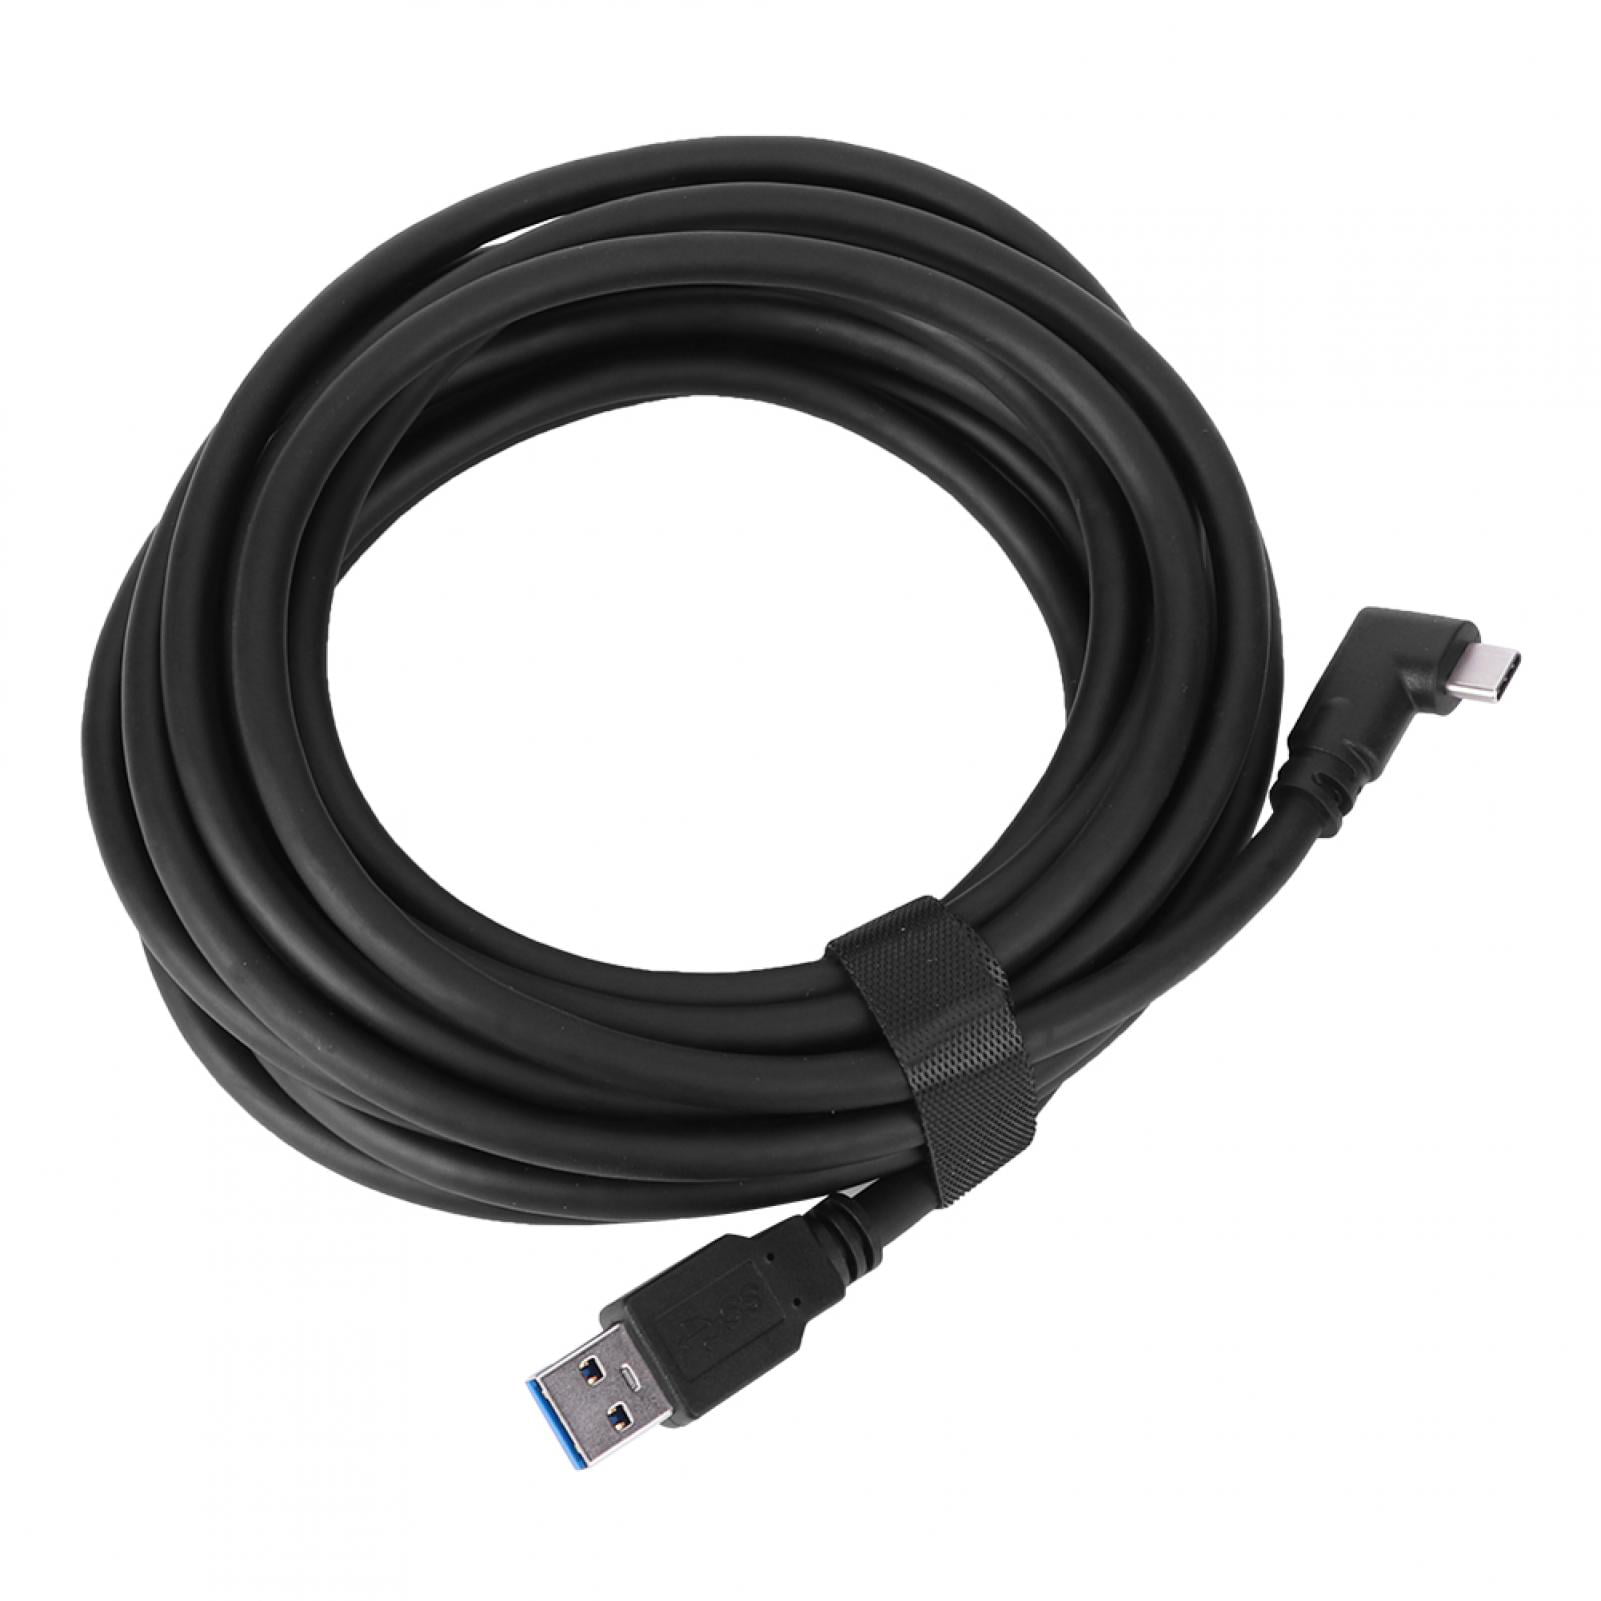 Camera Online Line 5m USB 3.0 C‑Type Plug to USB A Cable Connects Camera to Computer Camera Online Shooting Line USB 3.0 Computer Data Cable Type‑c Bend for A7RIV A7RIII